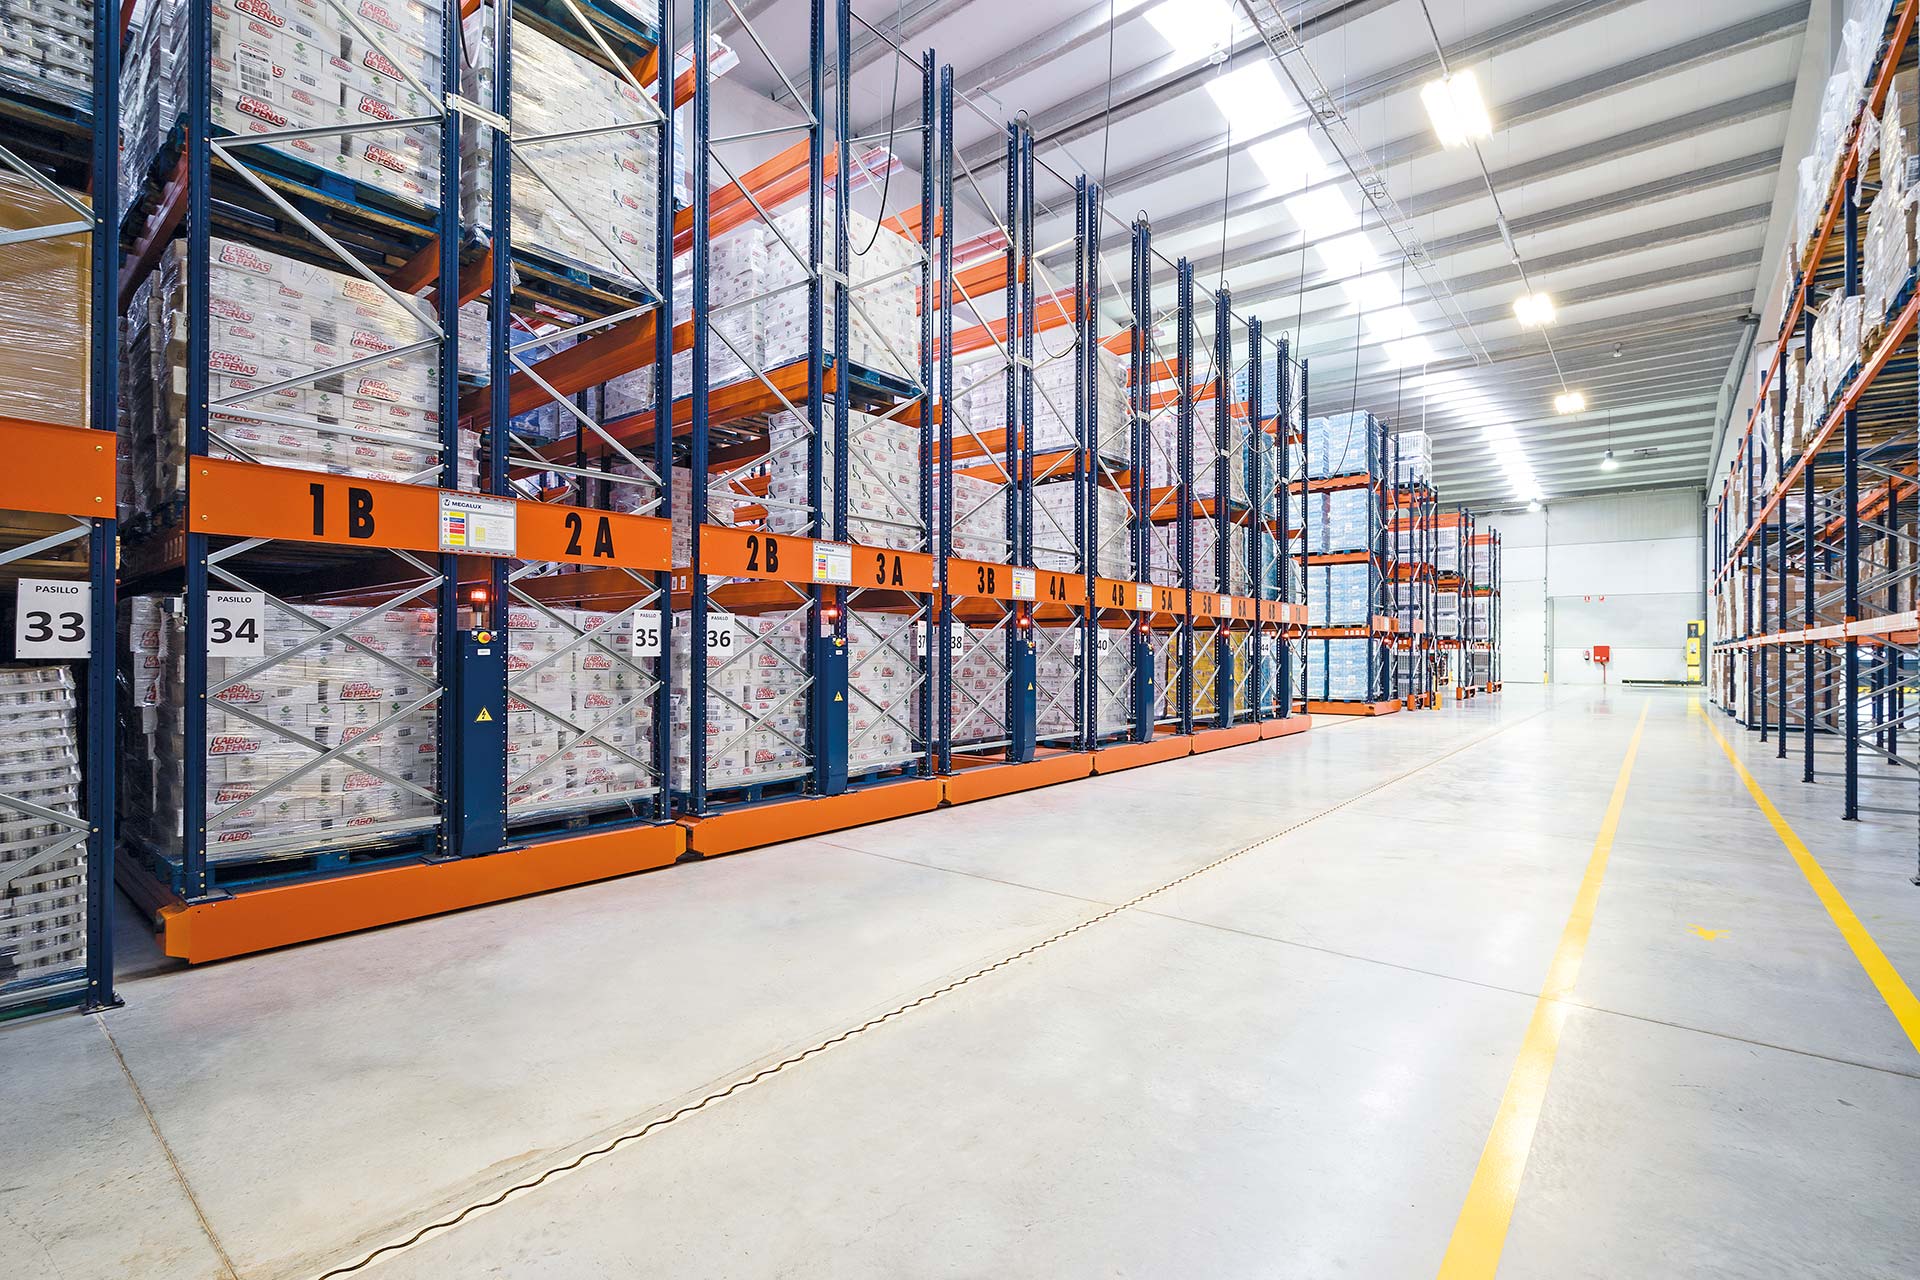 The mobility of this type racking is ideal for low-bay warehouses